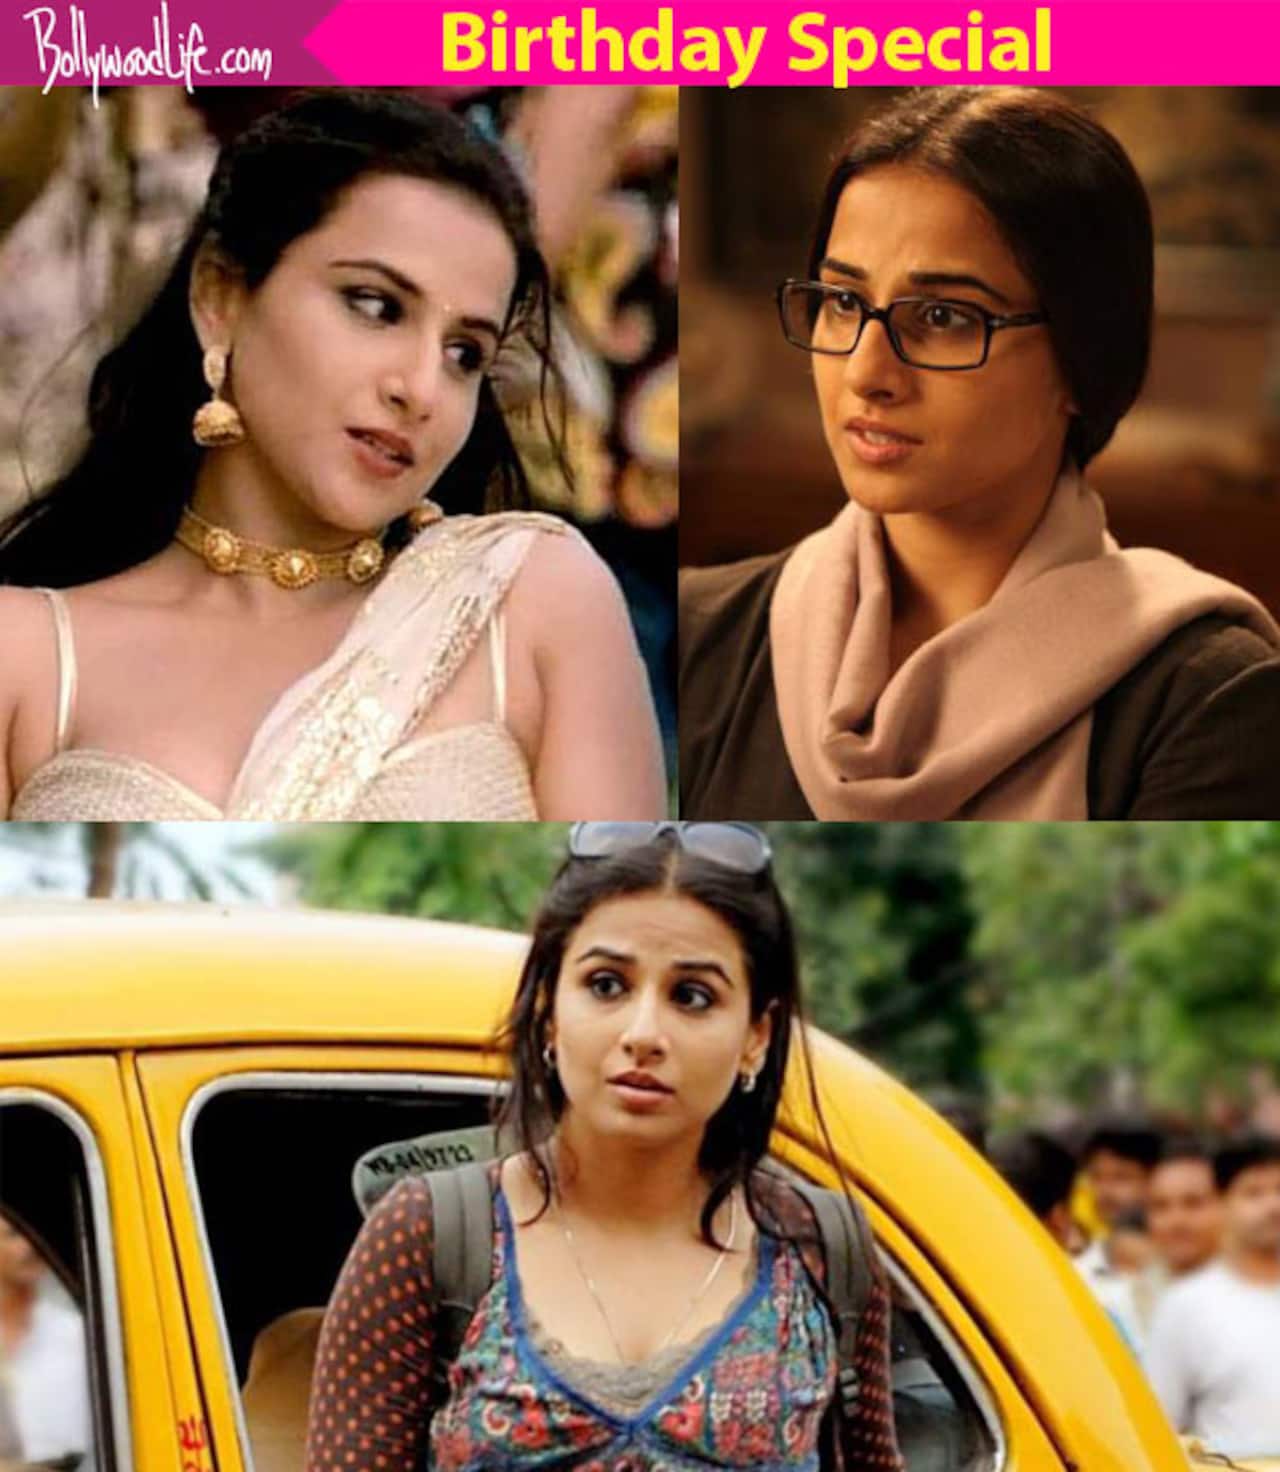 Kahaani, The Dirty Picture, Parineeta - 5 best roles that only Vidya Balan can pull off